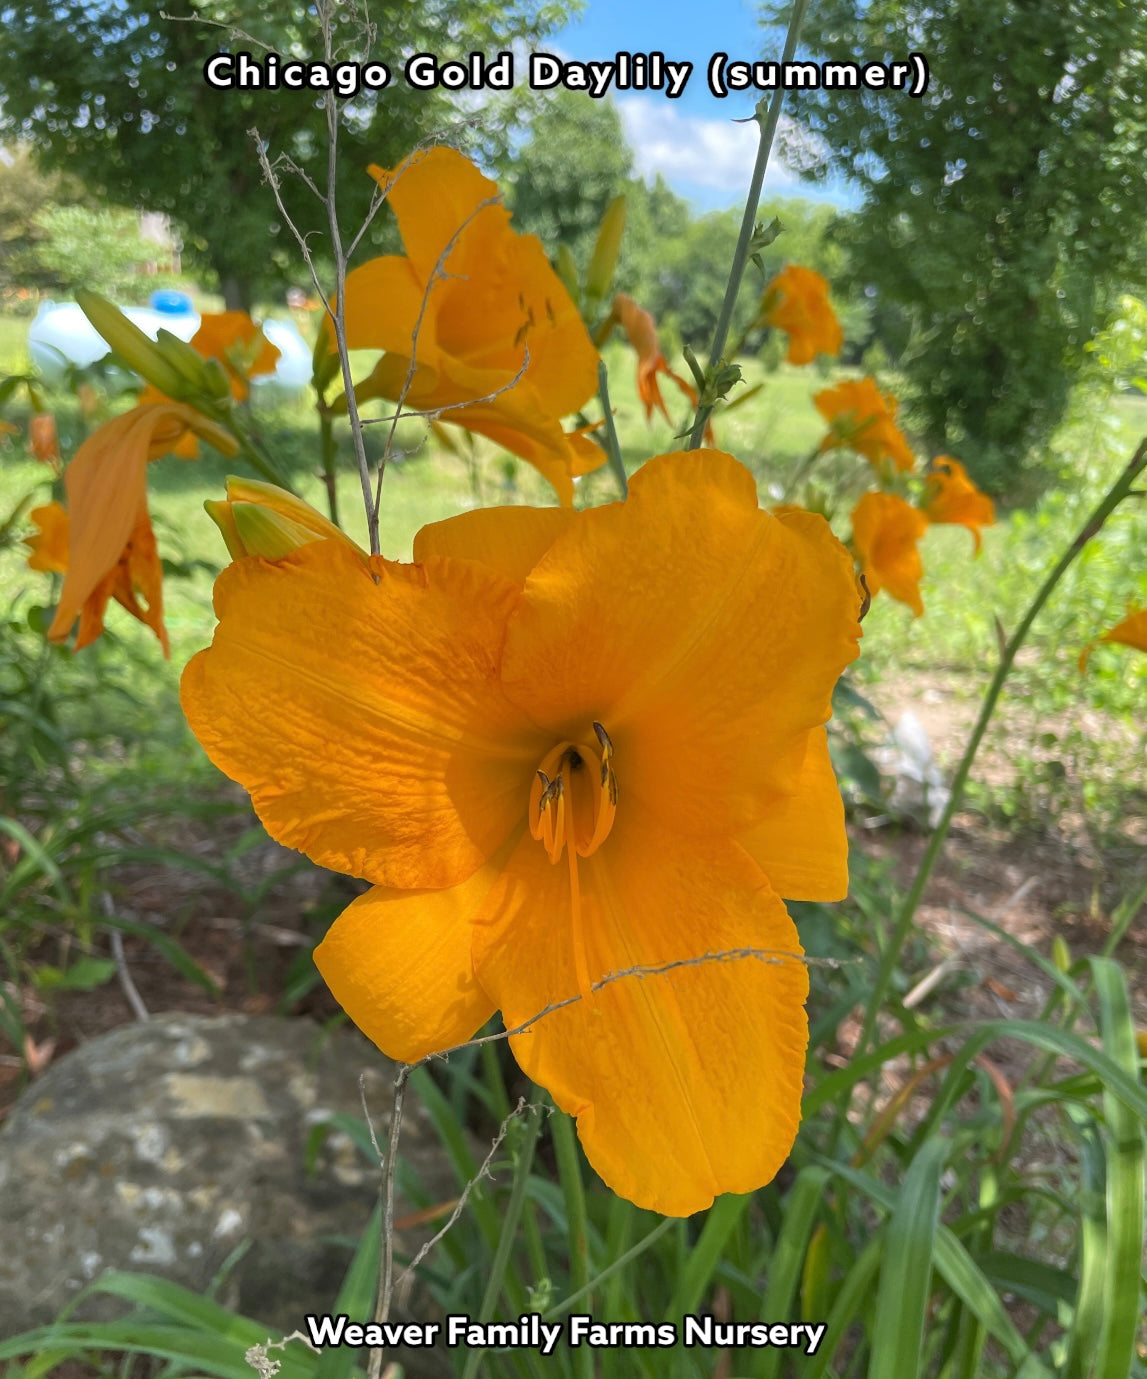 Daylily “Chicago Gold” | Long Bloom Time Day Hemerocallis Flower